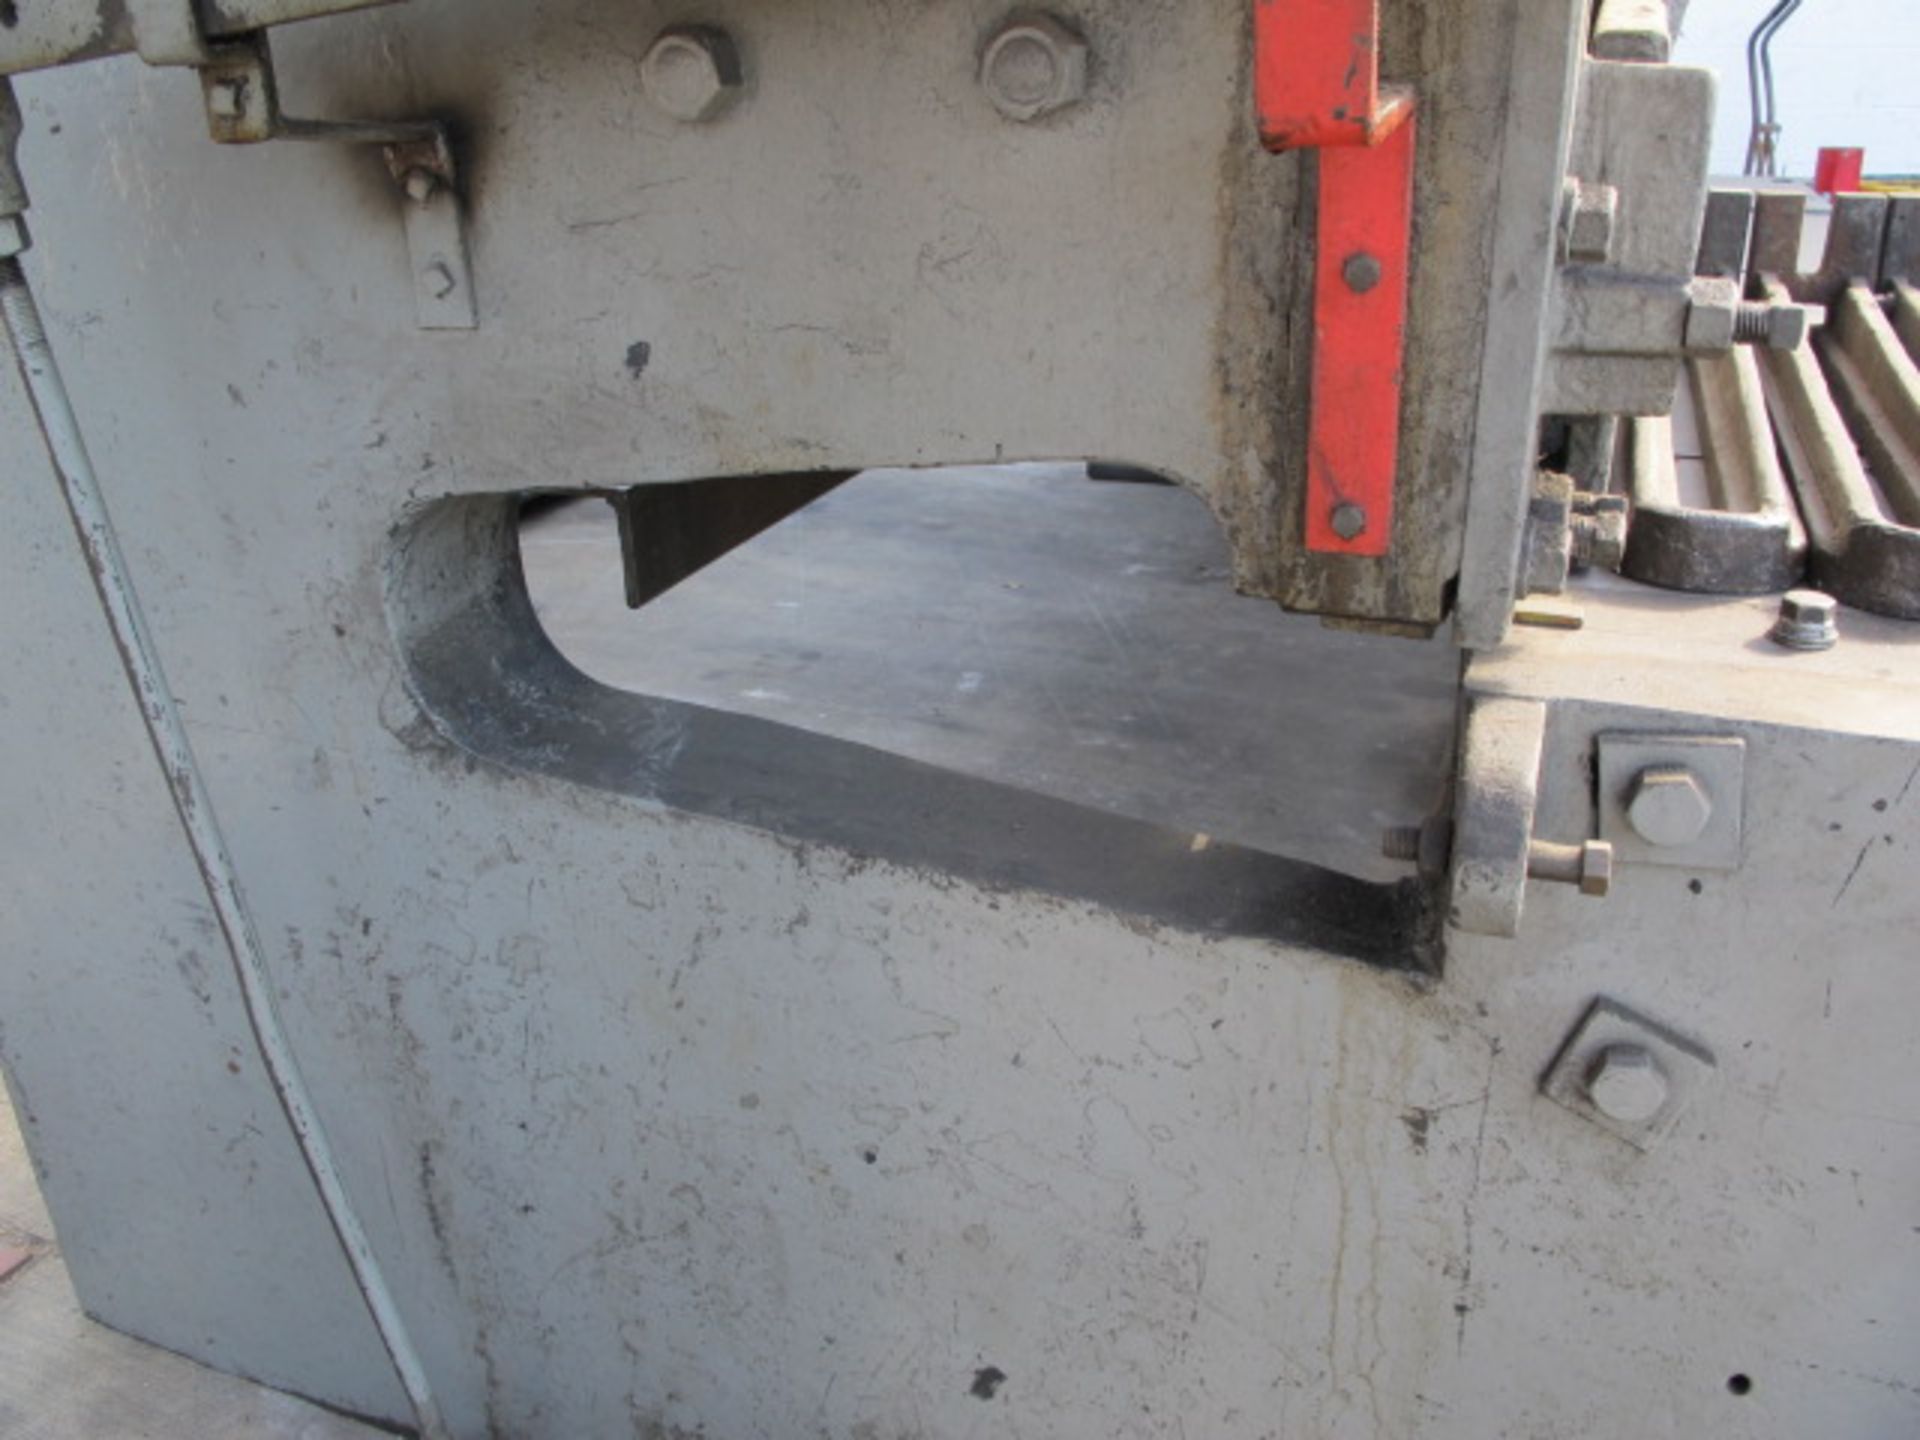 Bertsch & Co. 10' Deep Throat Power Shear s/n 7441 w/ Manual Back Gage, 25" Throat, 33 1/2"Supports - Image 5 of 6